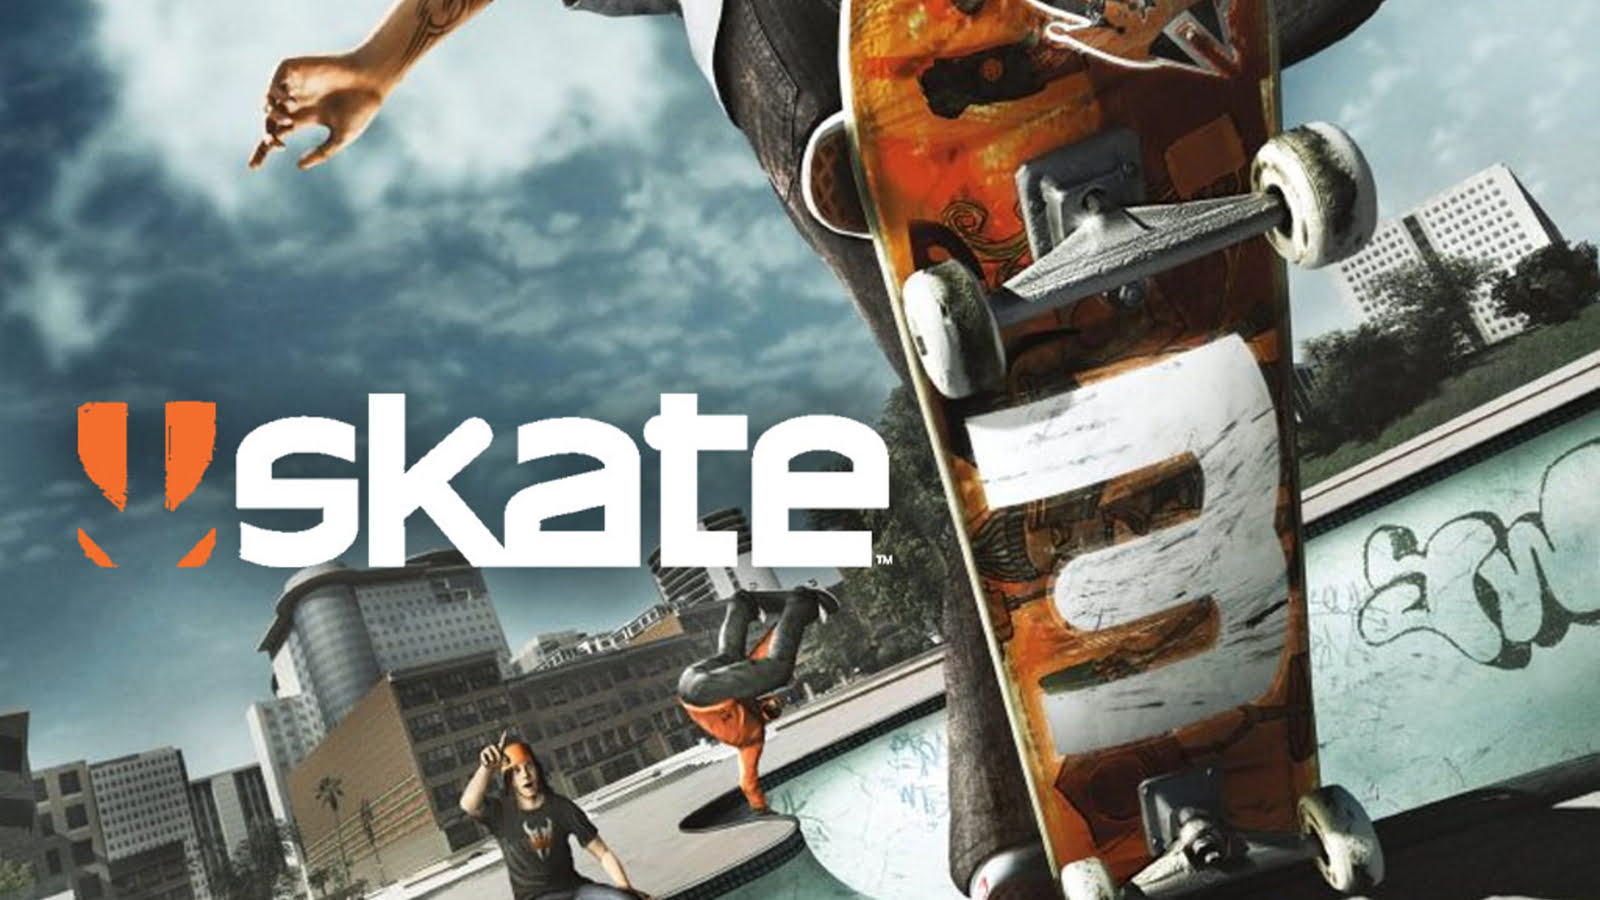 How To Really Play Skate 3 On PC? - PCSavage